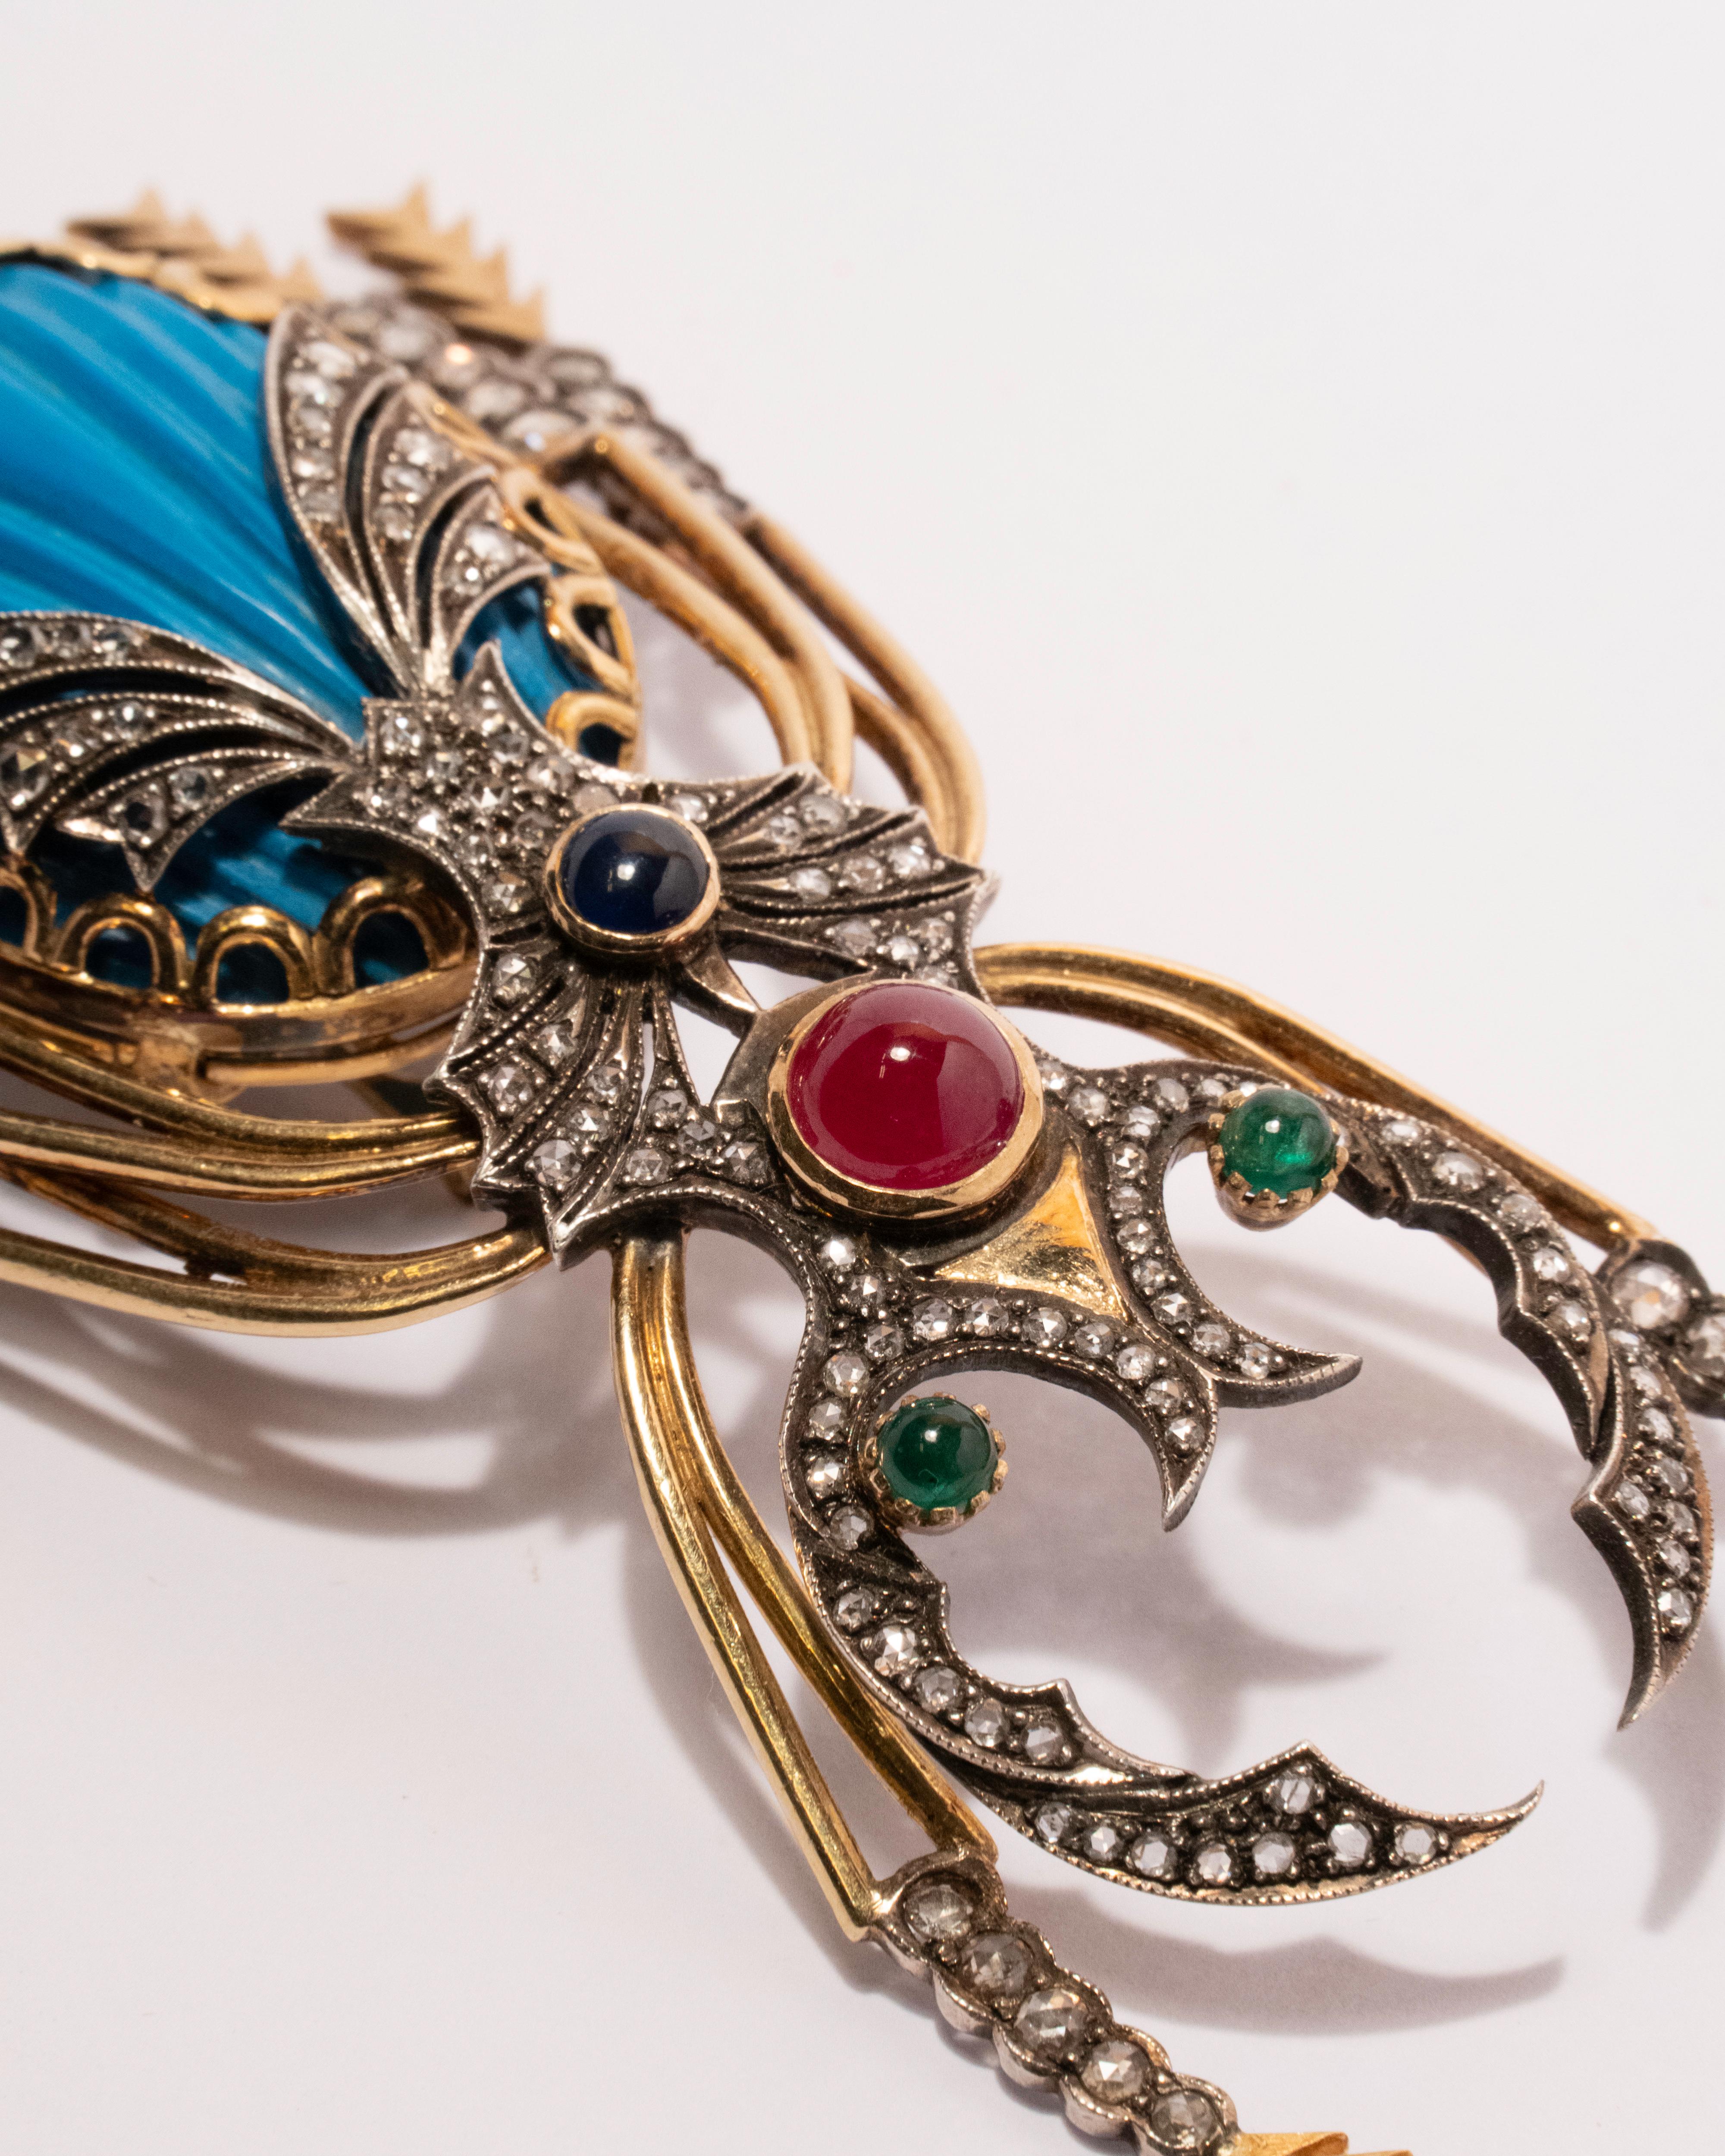 Step into the enchanting world of vintage elegance with this exquisite Stag-beetle Brooch, a true masterpiece from the 19th century. Crafted between 1800-1850, this stunning piece showcases the intricate craftsmanship and timeless beauty of the